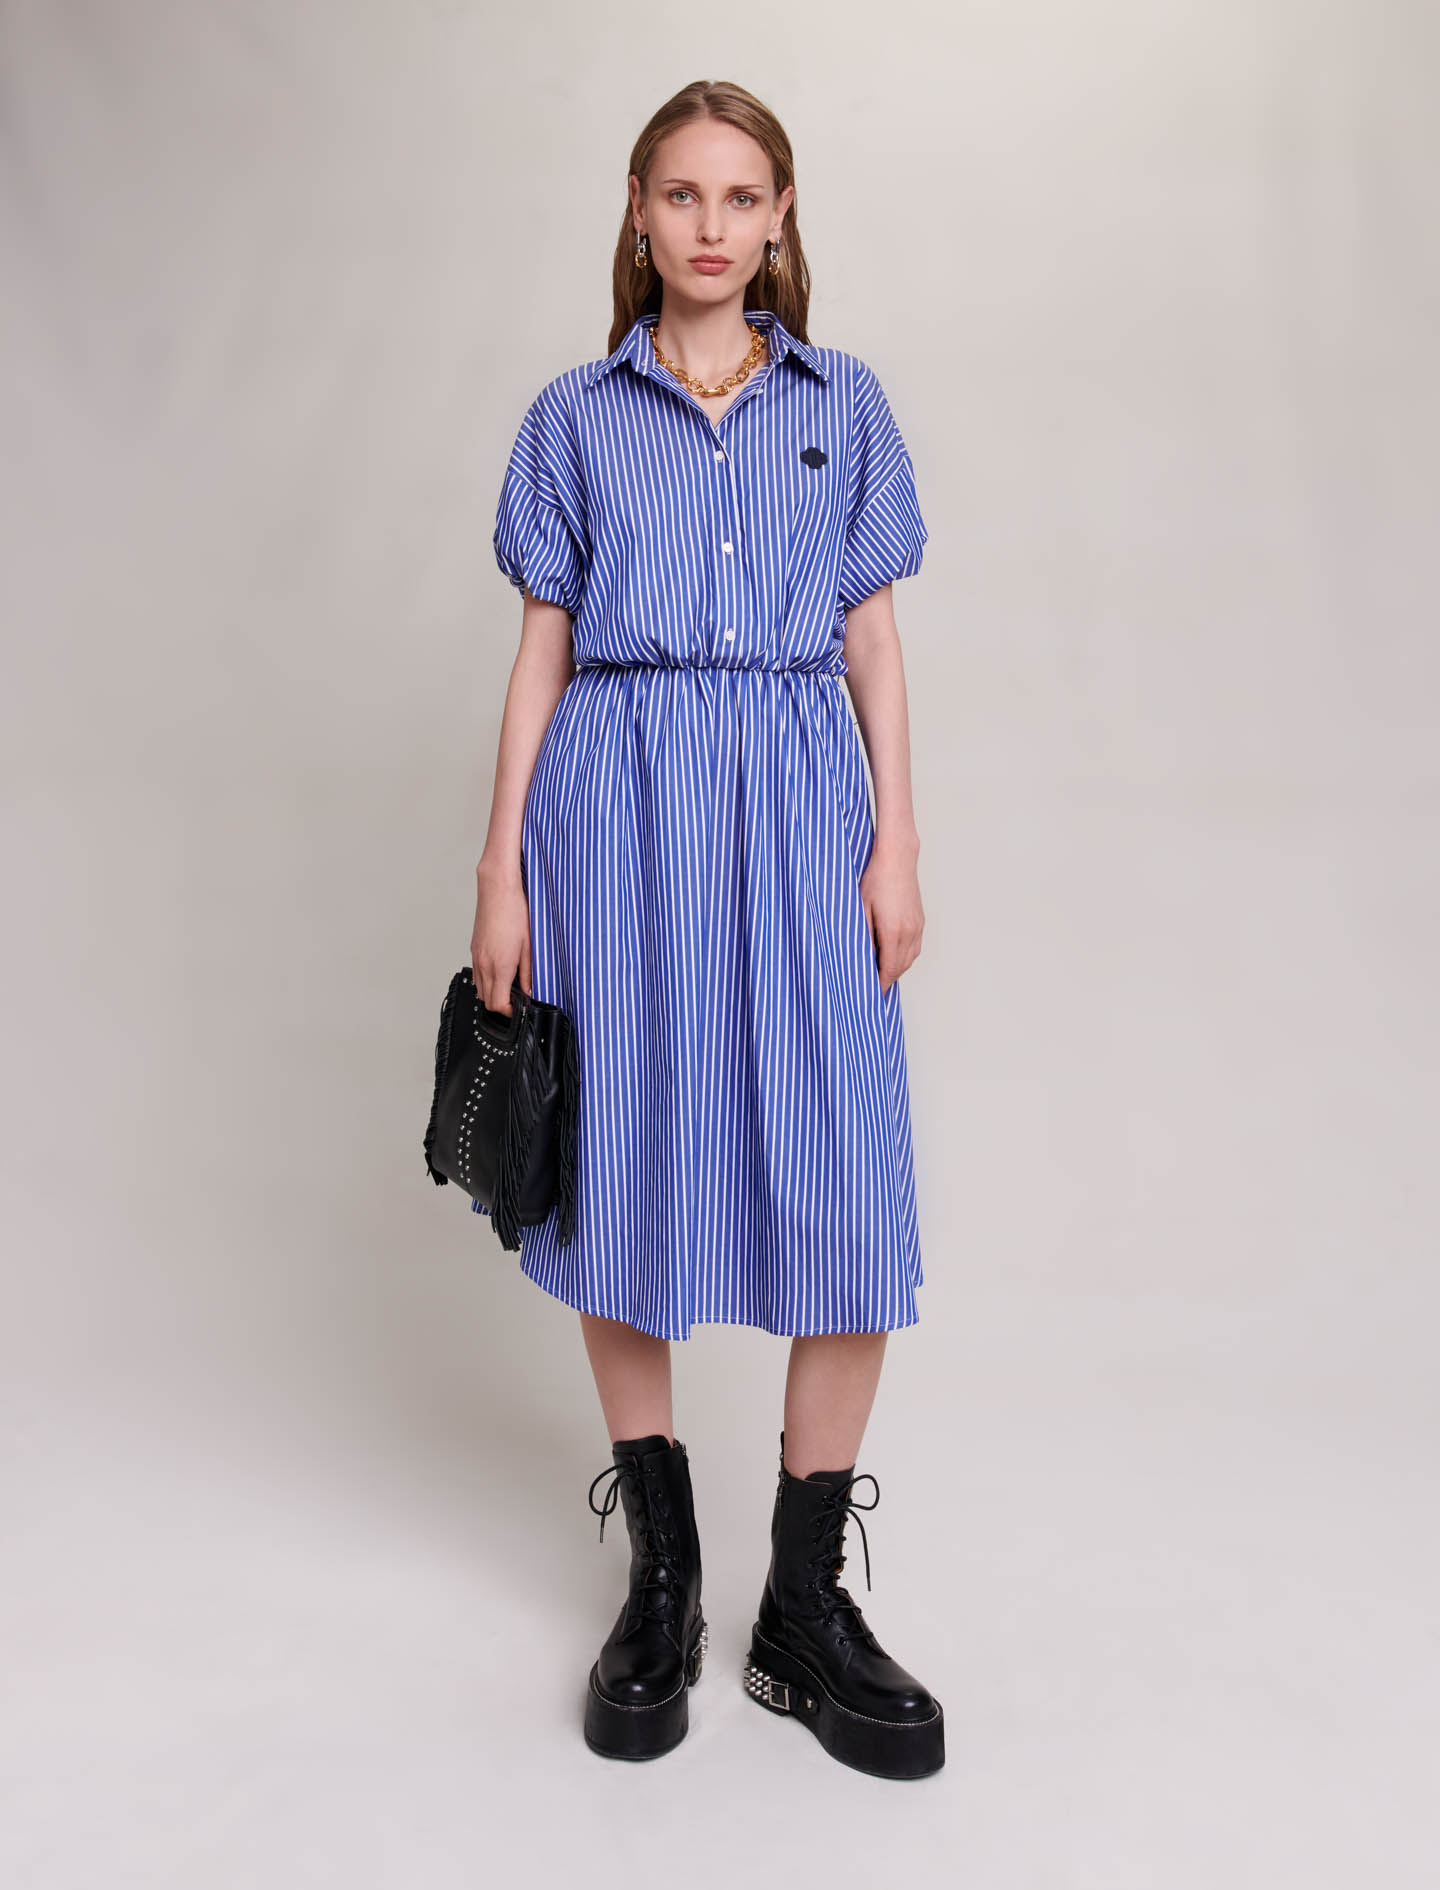 Mixte's cotton Patch: Long striped shirt dress for Fall/Winter, size Mixte-All Clothing-US XL / FR 41, in color Blue / Blue